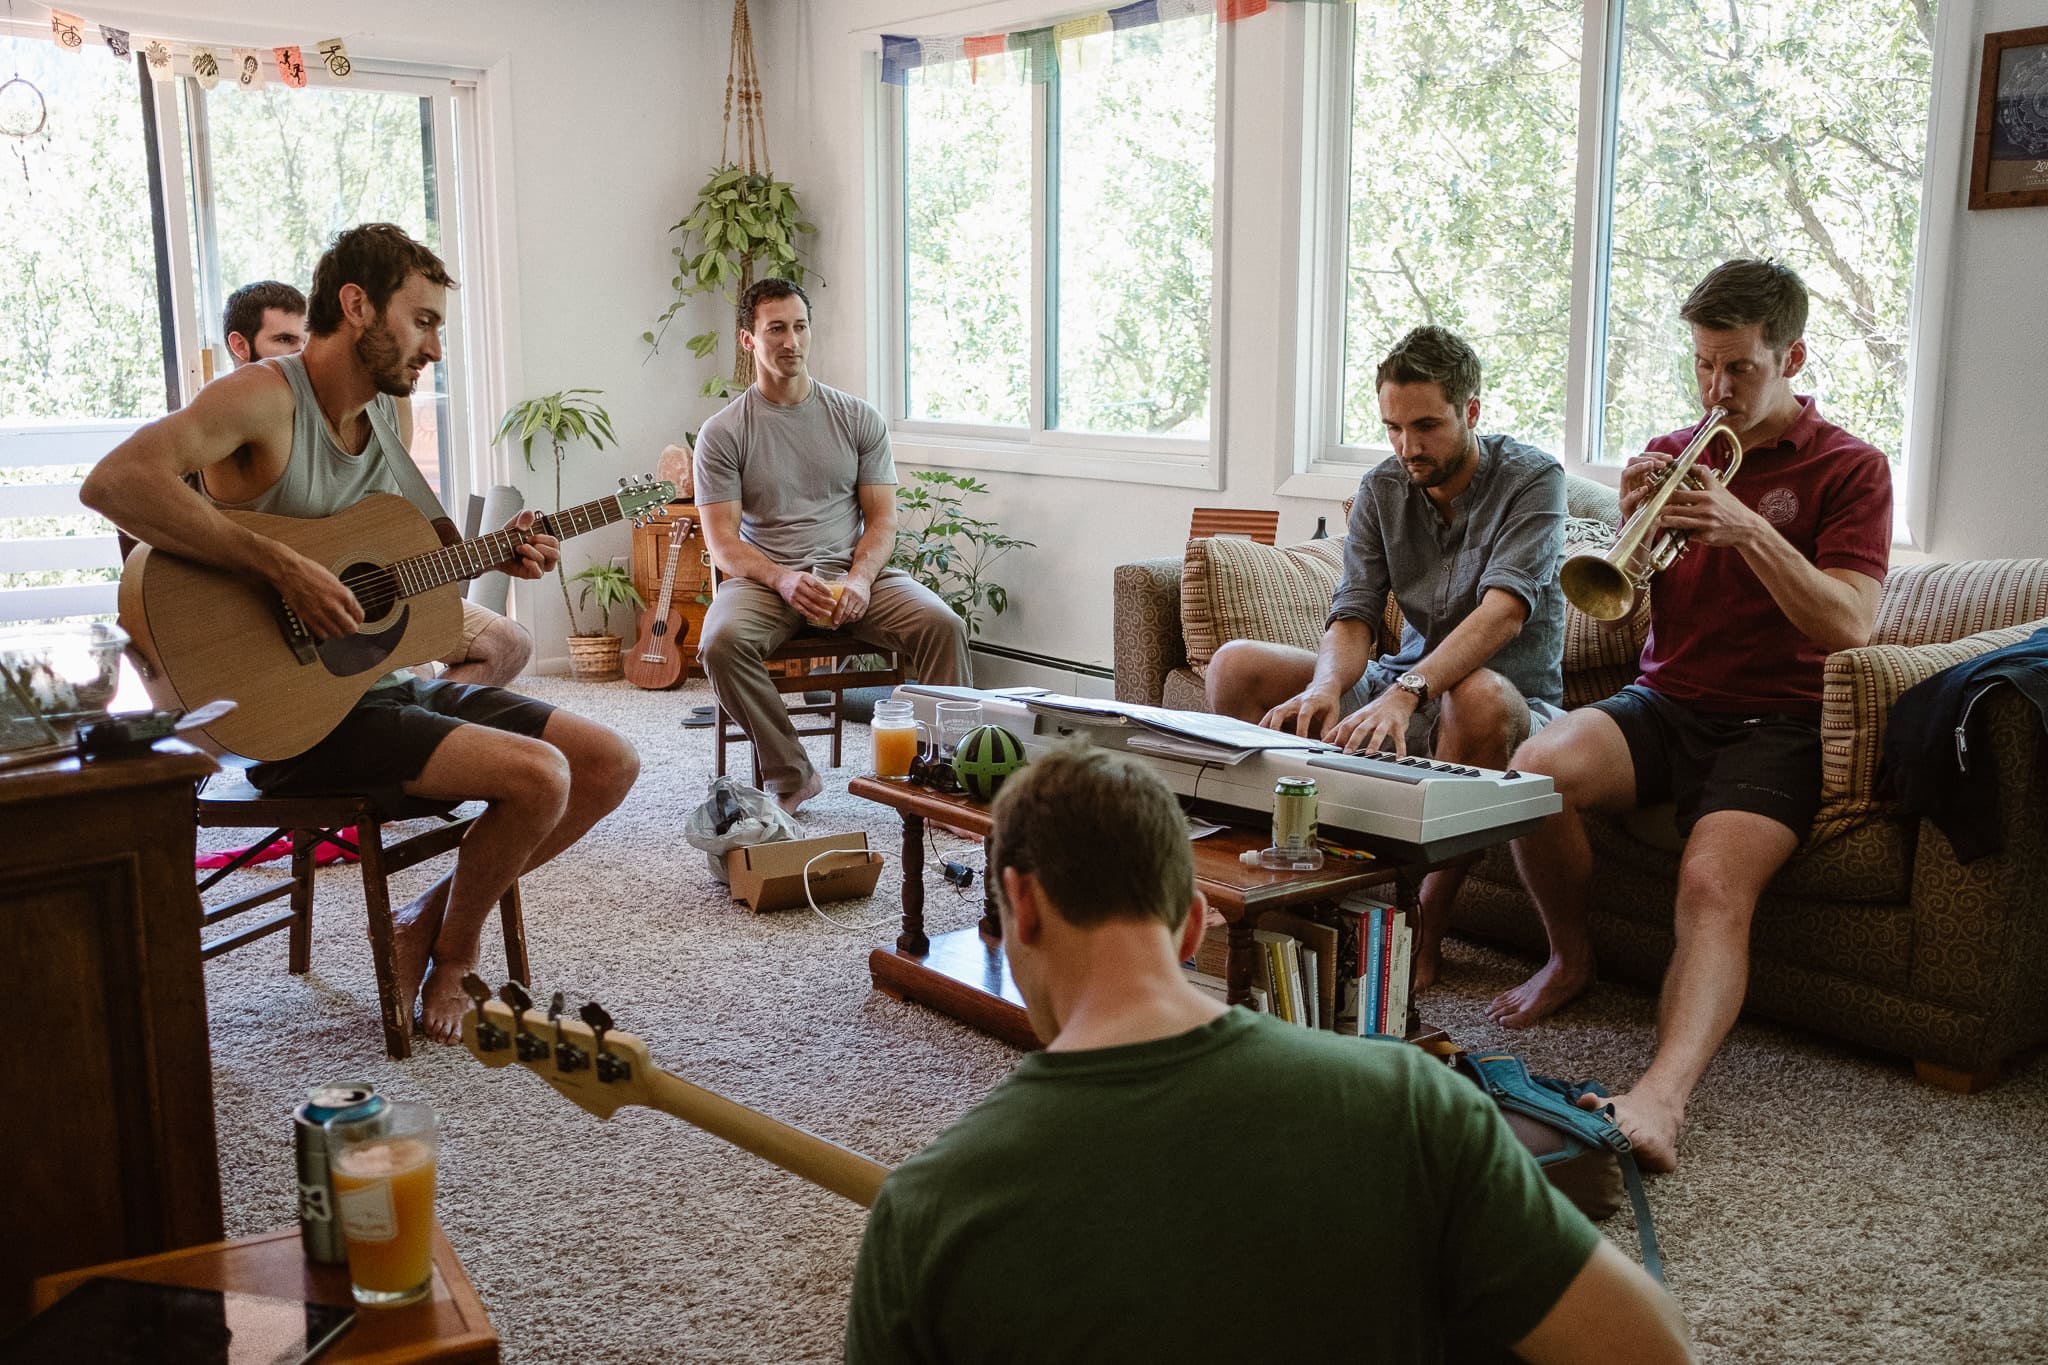 Redstone Inn wedding photographer, Carbondale wedding photographer, Colorado intimate wedding photographer, groom and groomsmen playing guitar and getting ready